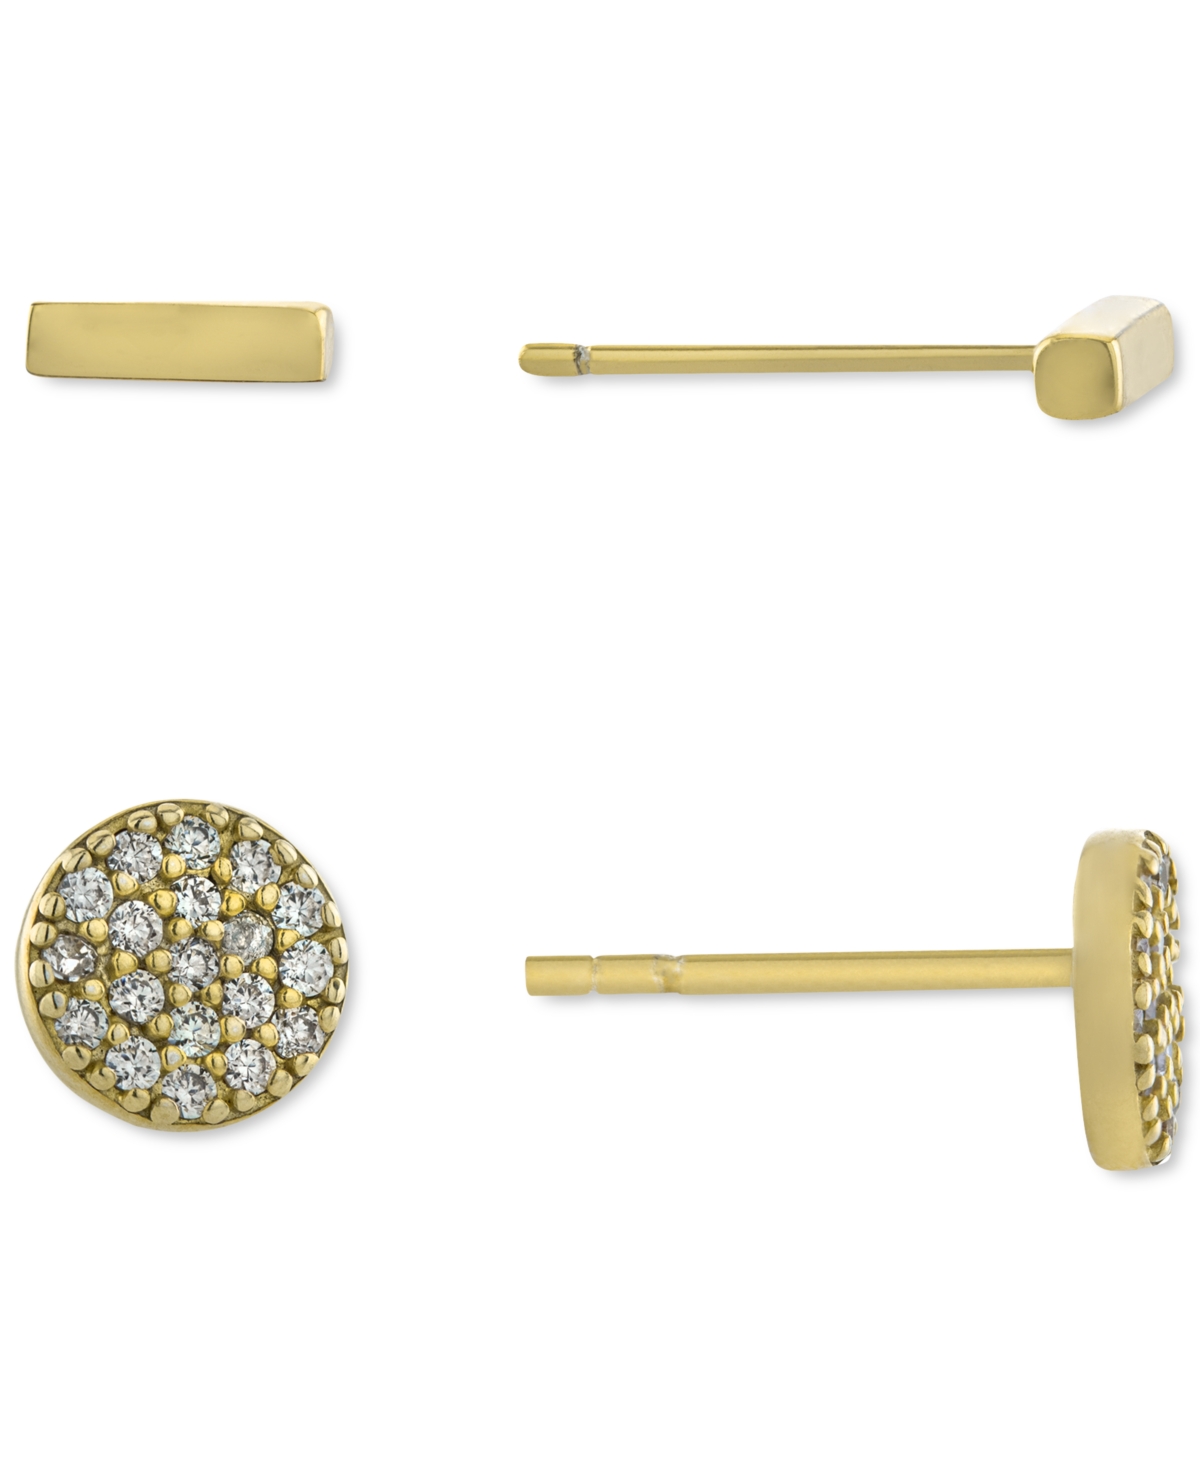 2-Pc. Cubic Zirconia Cluster & Bar Stud Earrings in Gold-Plated Sterling Silver, Created for Macy's - Yellow